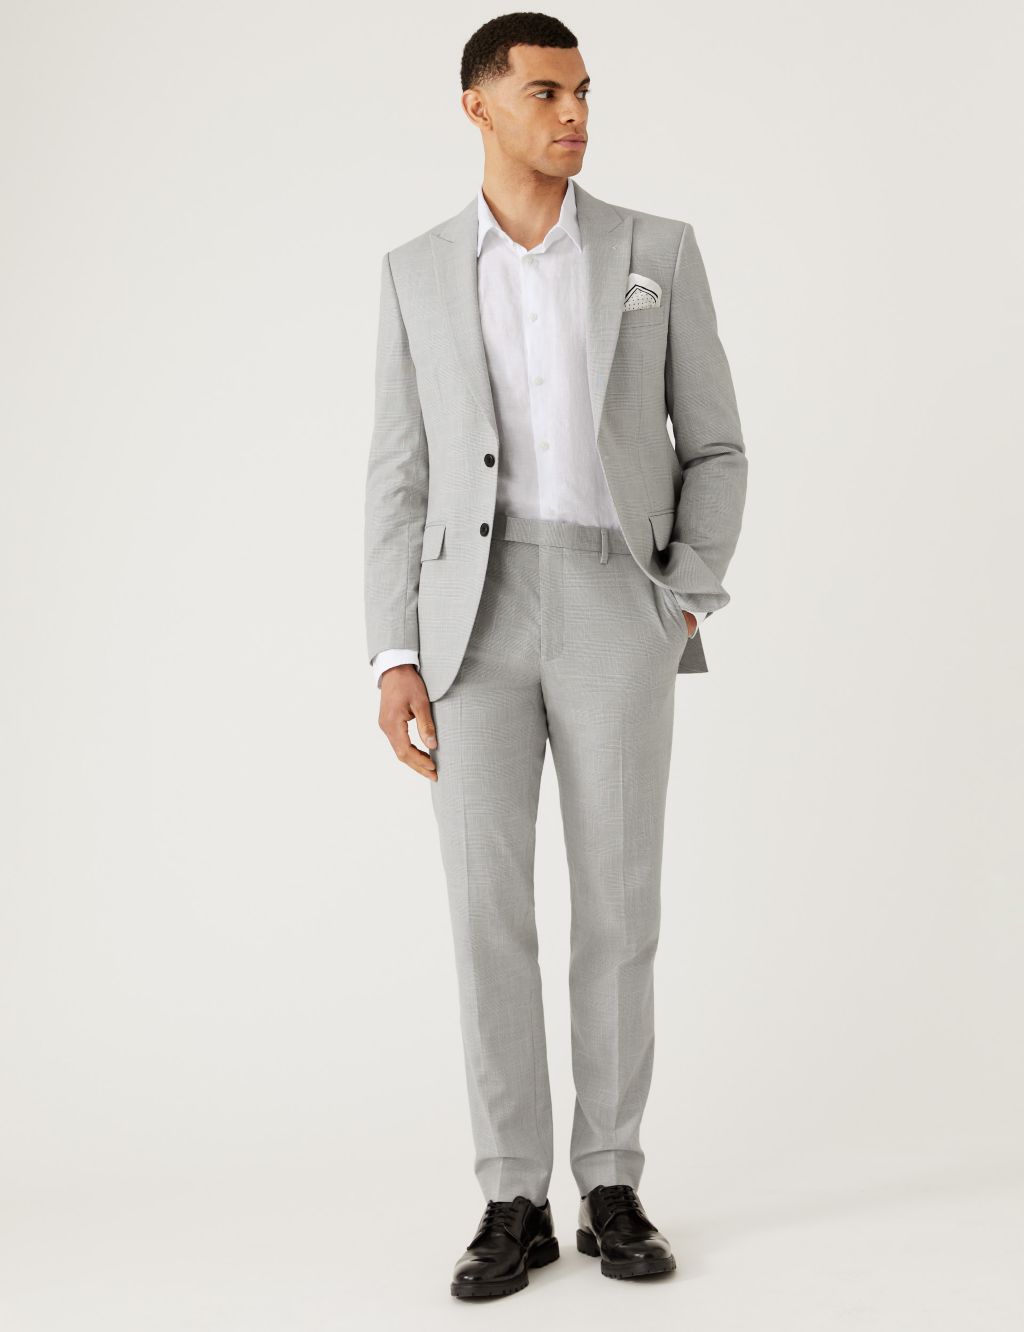 Slim Fit Prince Of Wales Check Suit image 6